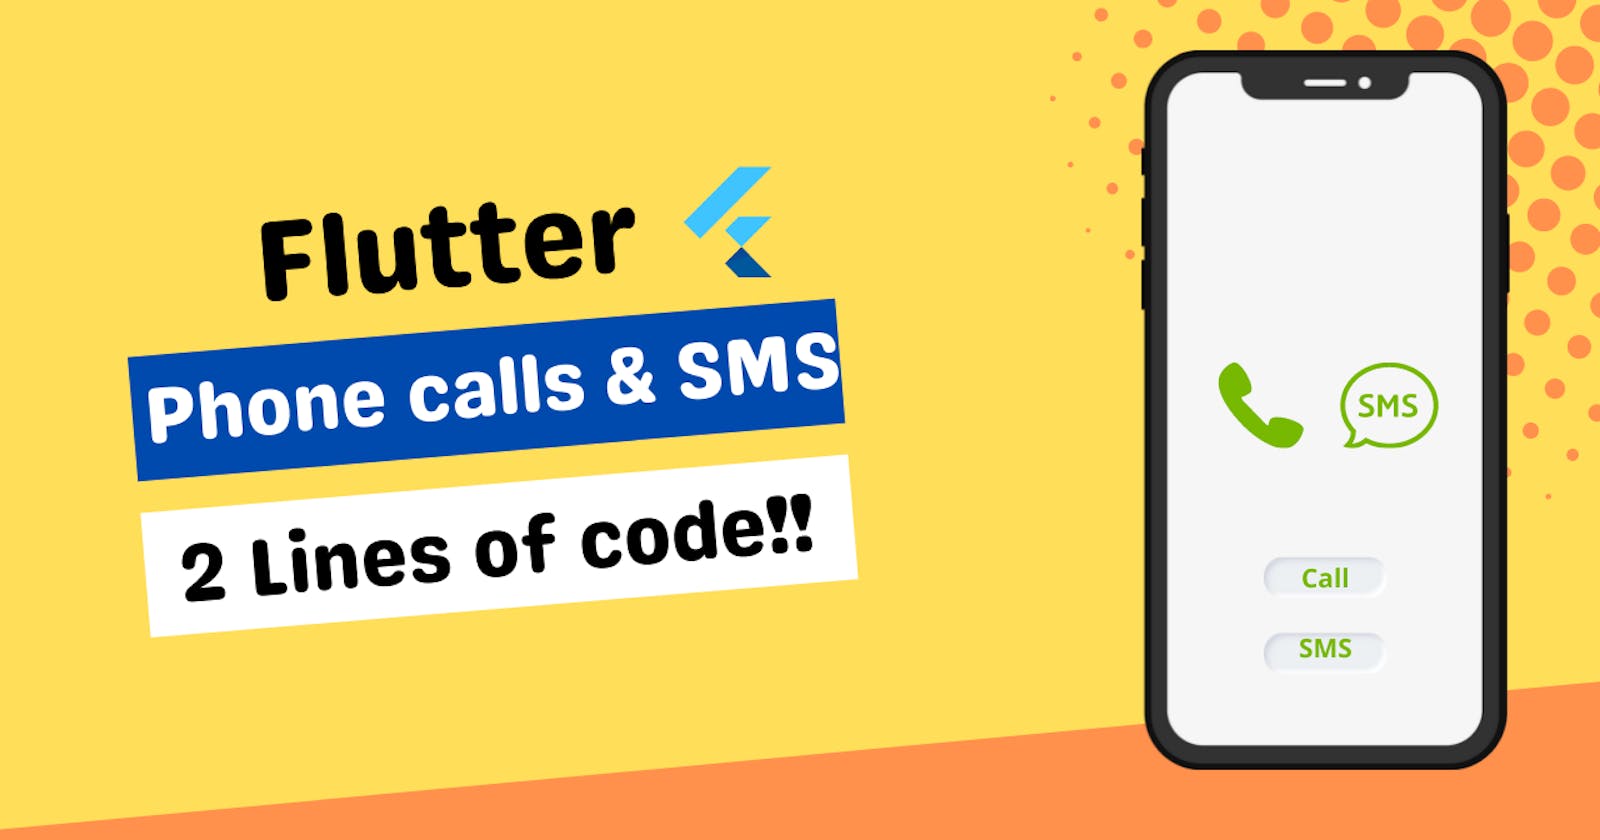 How to make phone calls and send SMS via your Flutter app